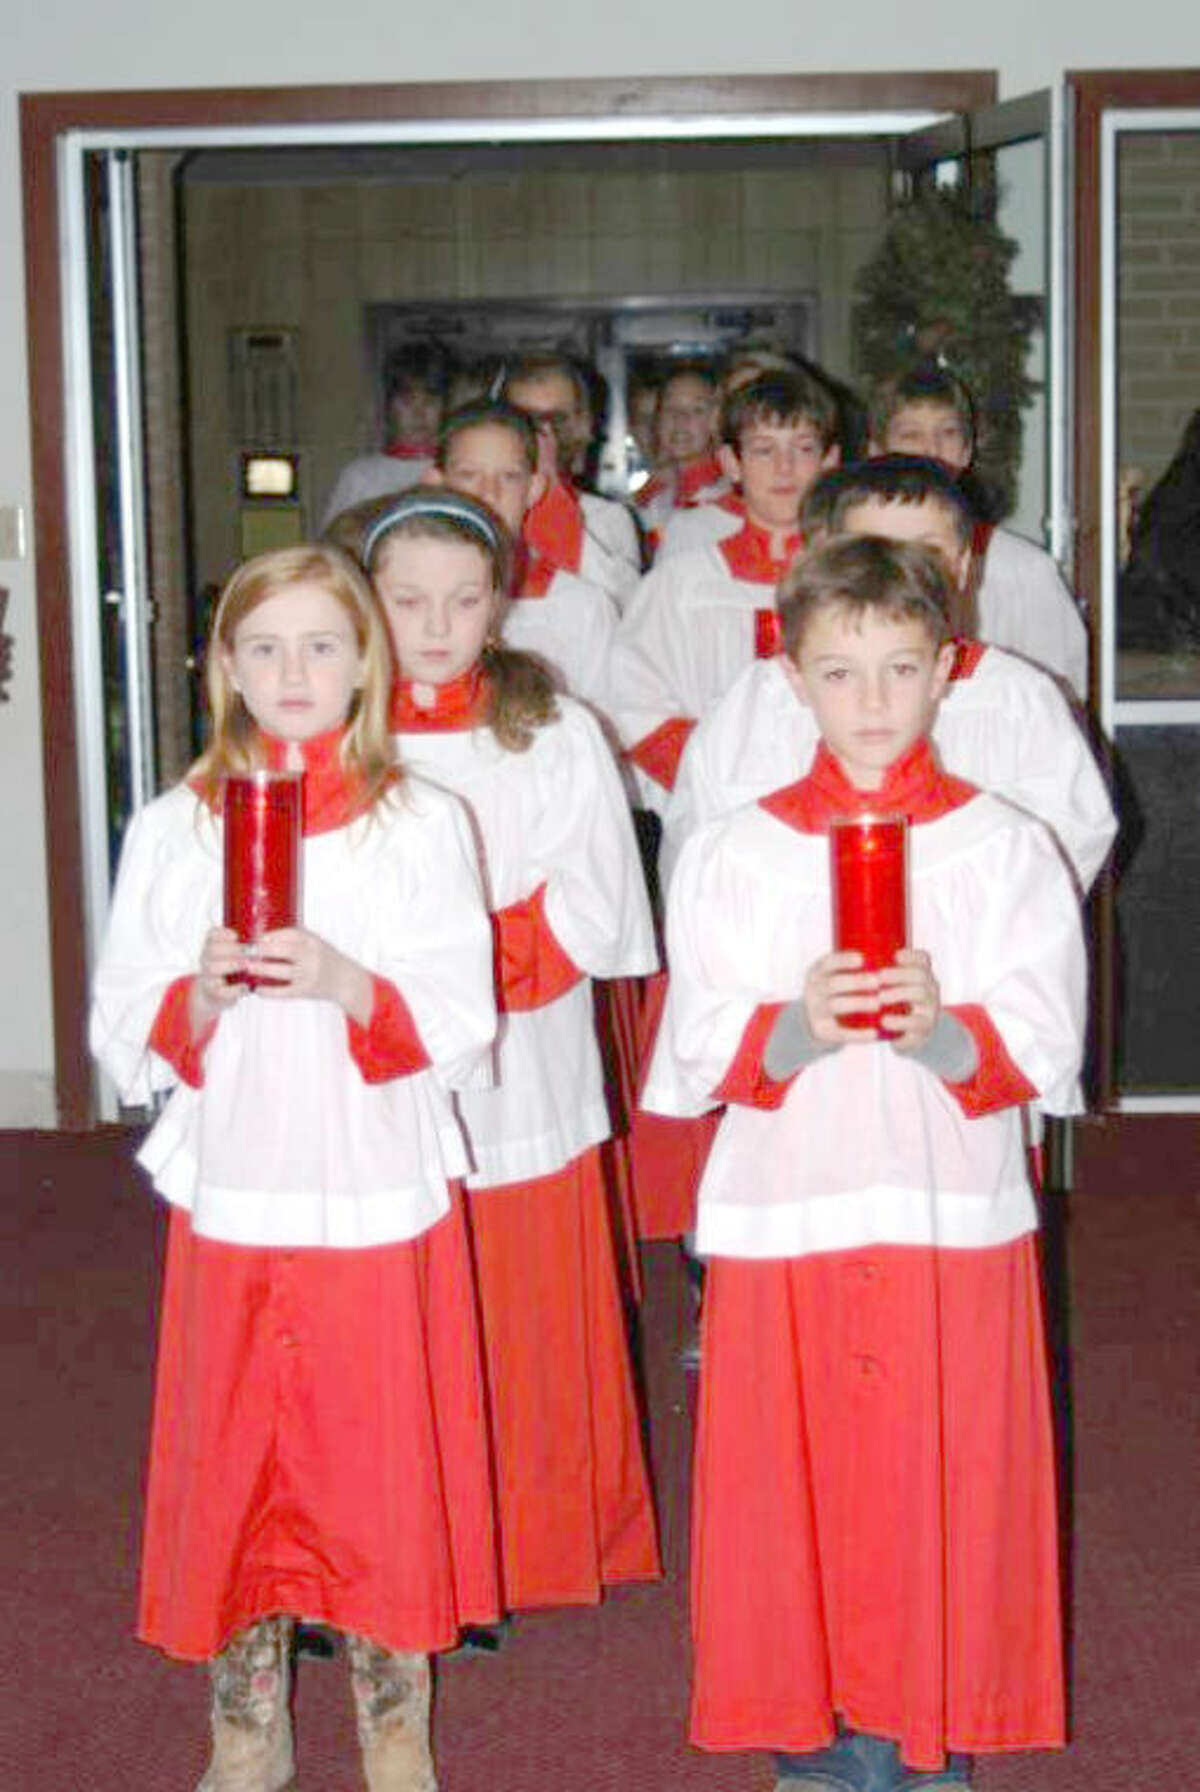 As has been the tradition since its beginning in 1972, a candlelight procession of acolytes will begin the 19th staging of the Nazareth Christmas Pageant on Sunday and Monday, Dec. 22 and 23 at 7:30 p.m. in the Holy Family Church in Nazareth.